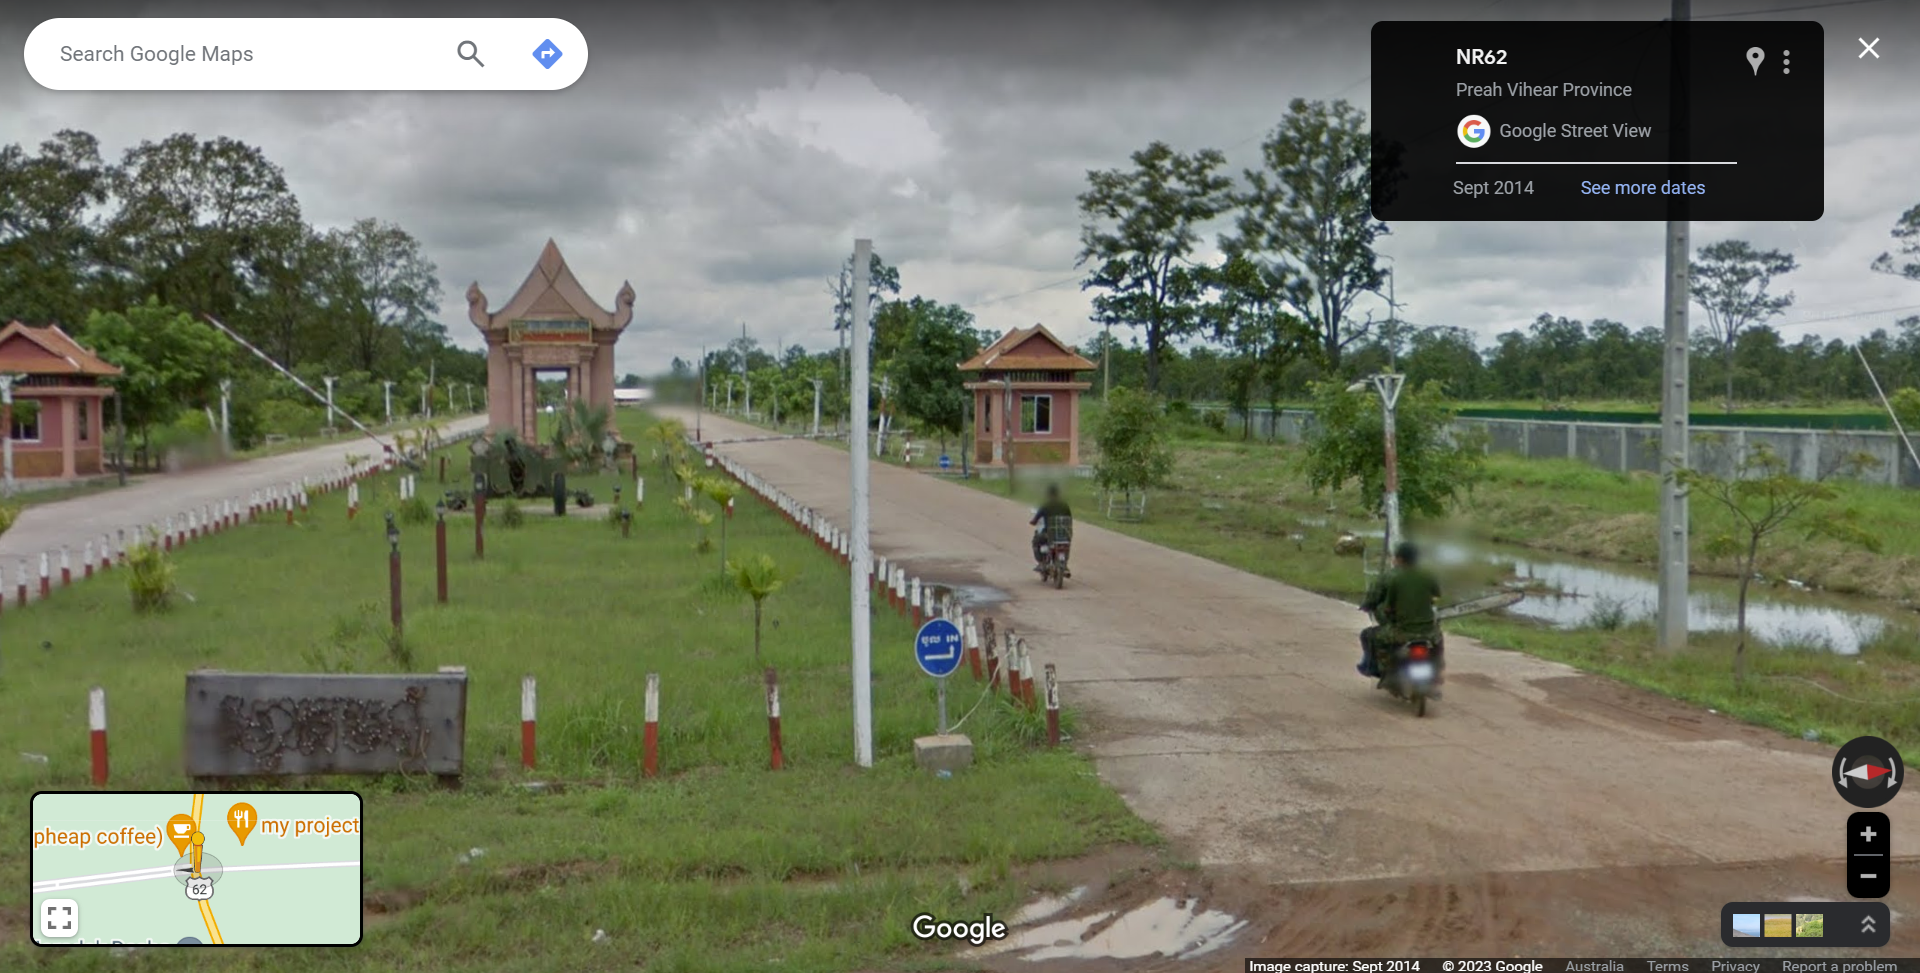 The extent of the Cambodian military's involvement in illegal logging throughout Chhaeb-Preah Roka Wildlife Sanctuary is anecdotally highlighted by this image captured by Google Street View in 2014 showing a soldier carrying a chainsaw returning to their base nearby the protected forest. Image by Google Street View.